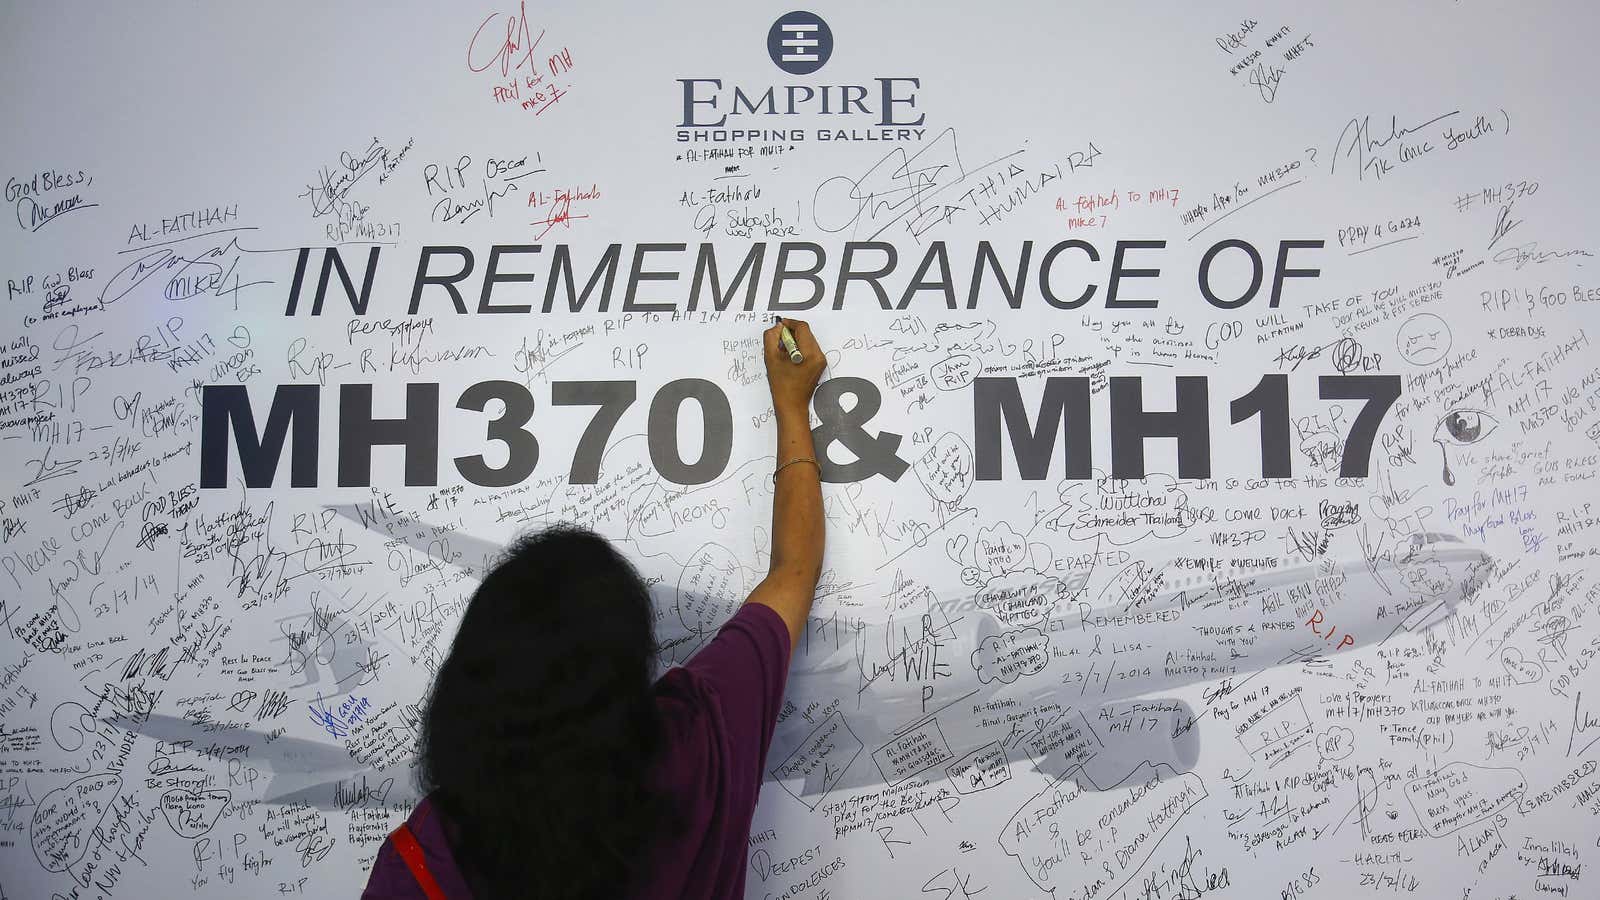 It’s time for Malaysia Airlines to show its human side.